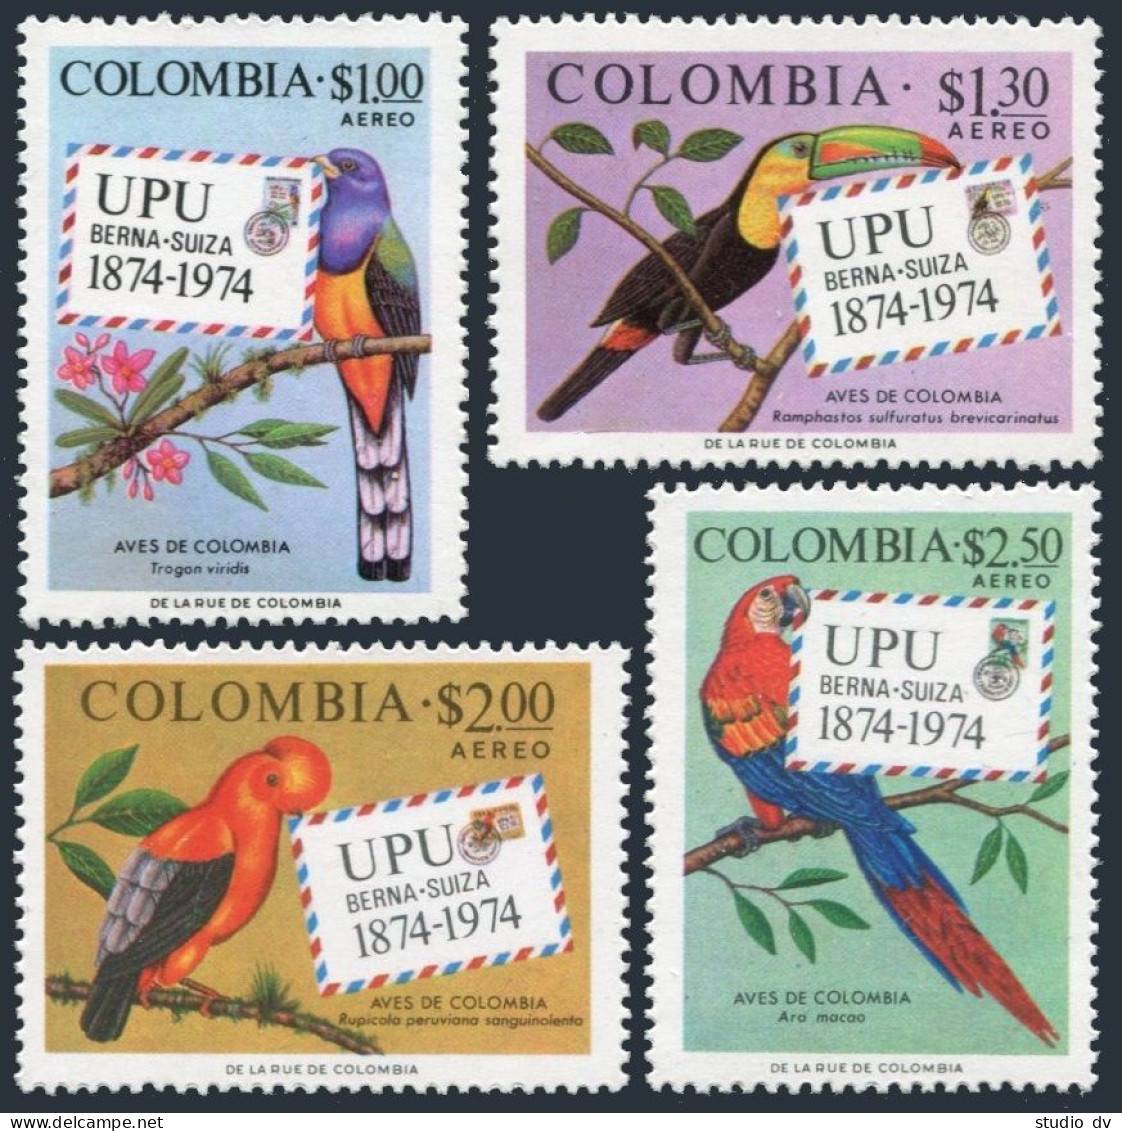 Colombia C611-C614, MNH. Michel 1275-1278. UPU-100, 1984. Parrot. - Colombia